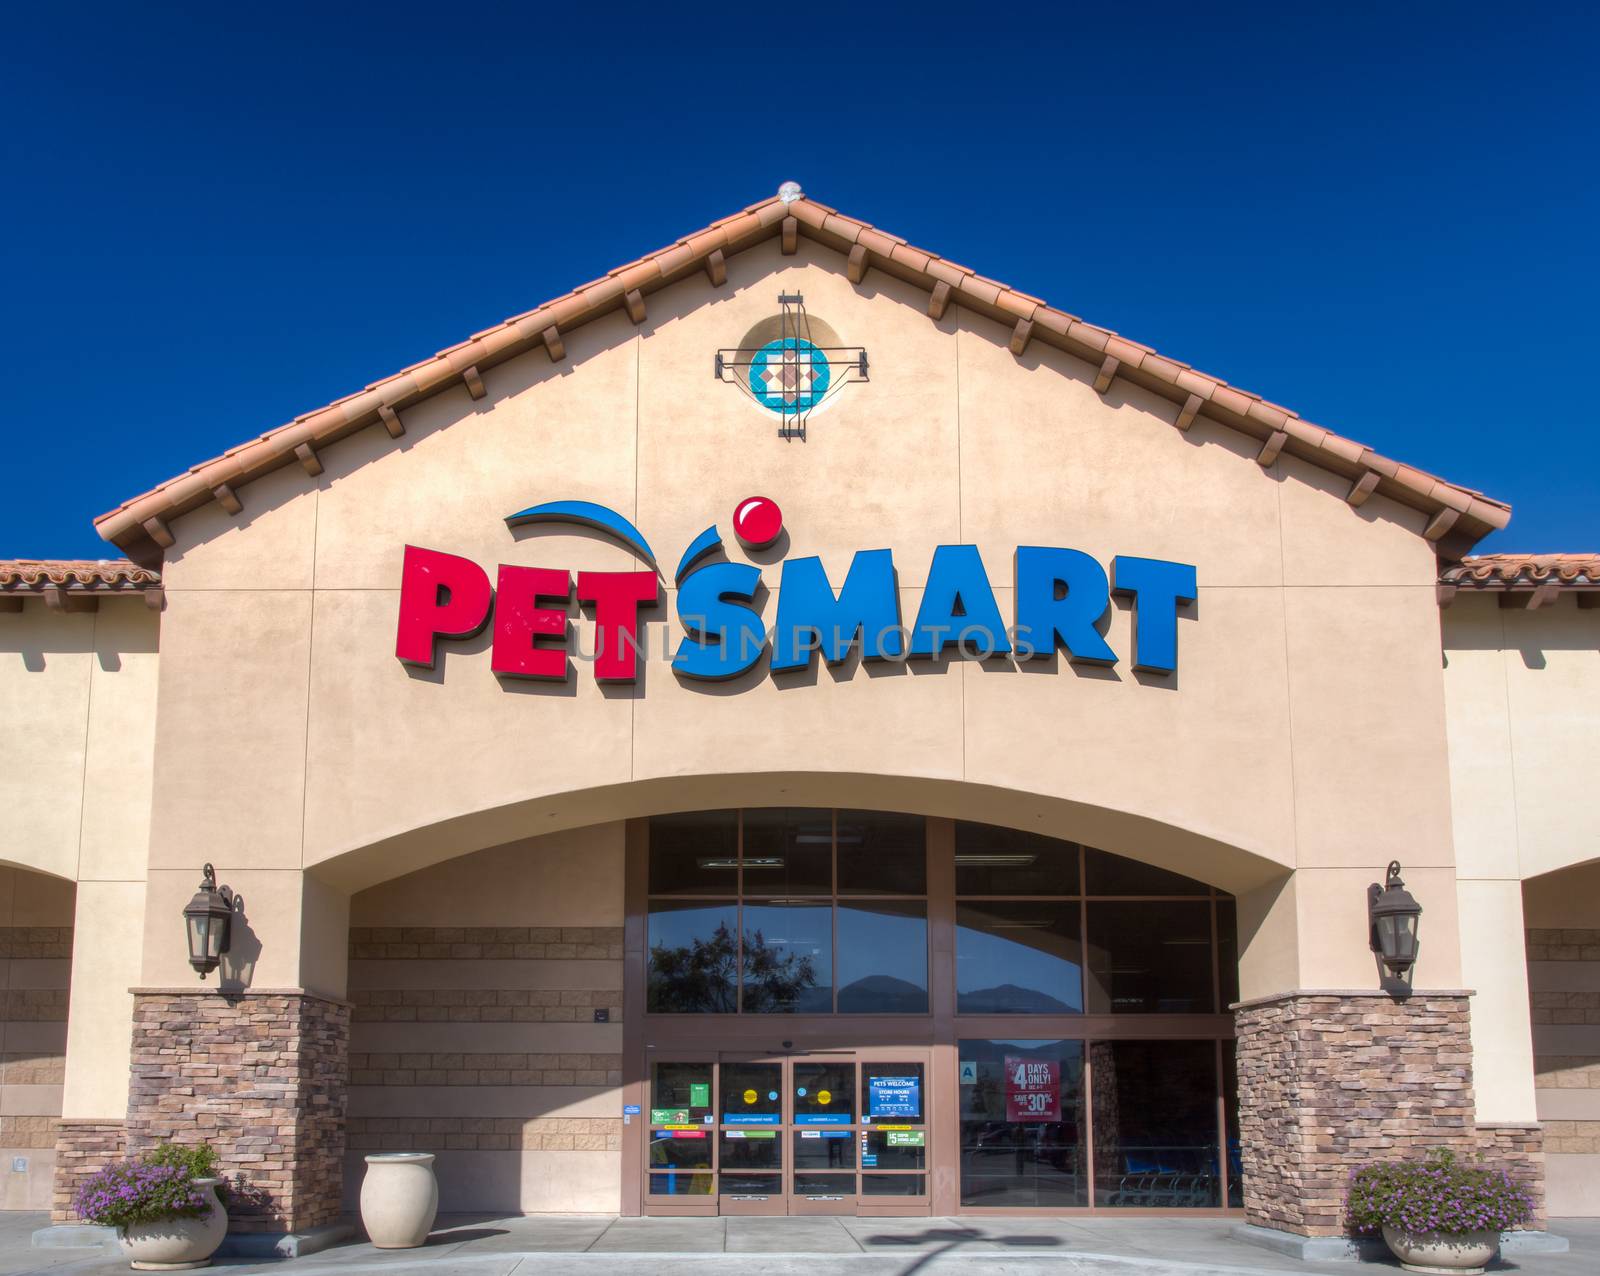 SANTA CLARITA, CA/USA - DECEMBER 6, 2014  Exterior view PetSmart store. PetSmart, Inc. is a retail specialty chain of pet supplies and services.